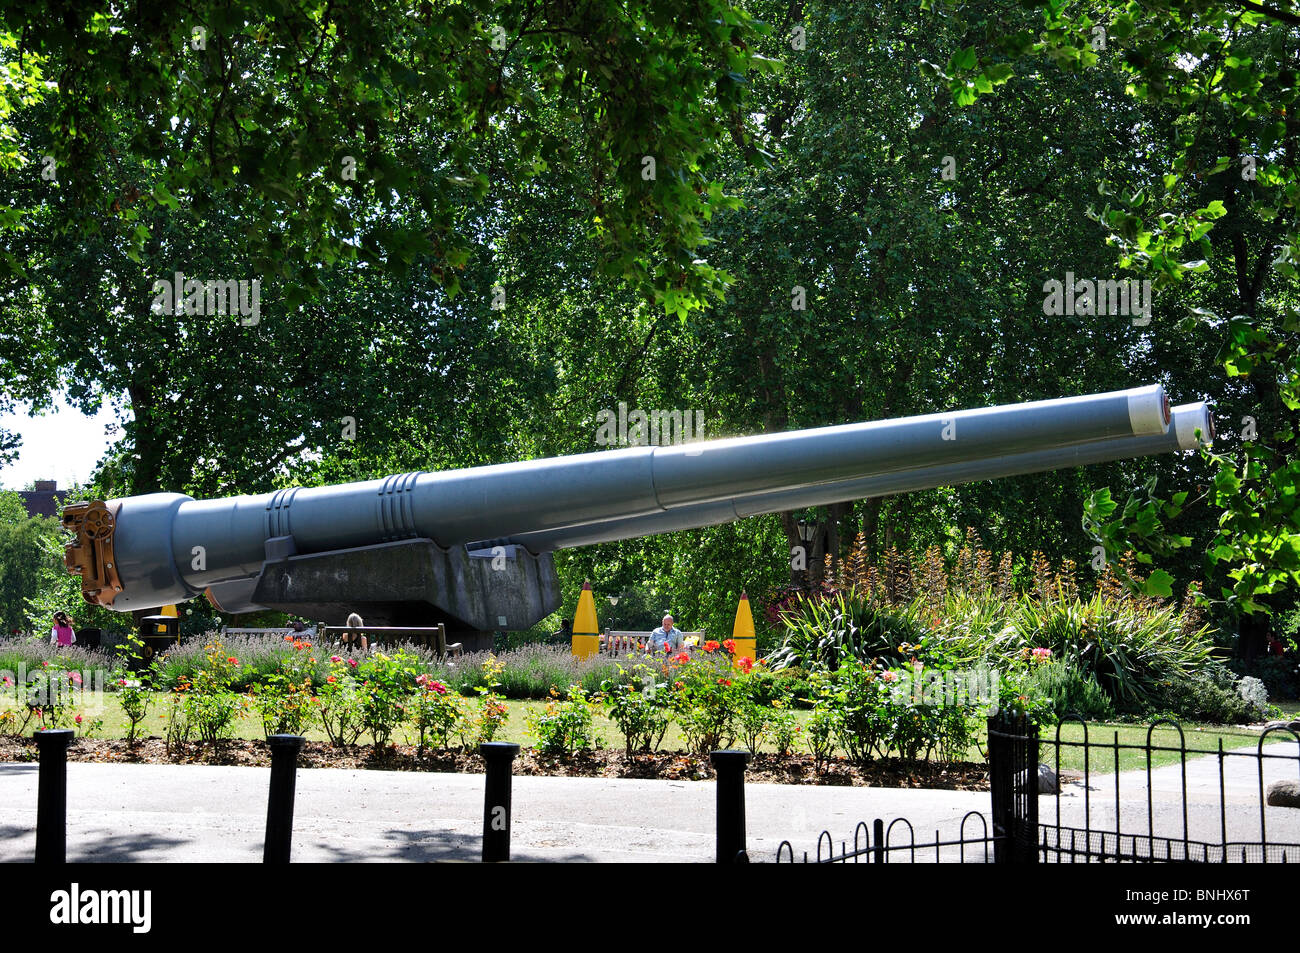 15 canons, Imperial War Museum, Lambeth Road, le London Borough of Southwark, Londres, Angleterre, Royaume-Uni Banque D'Images